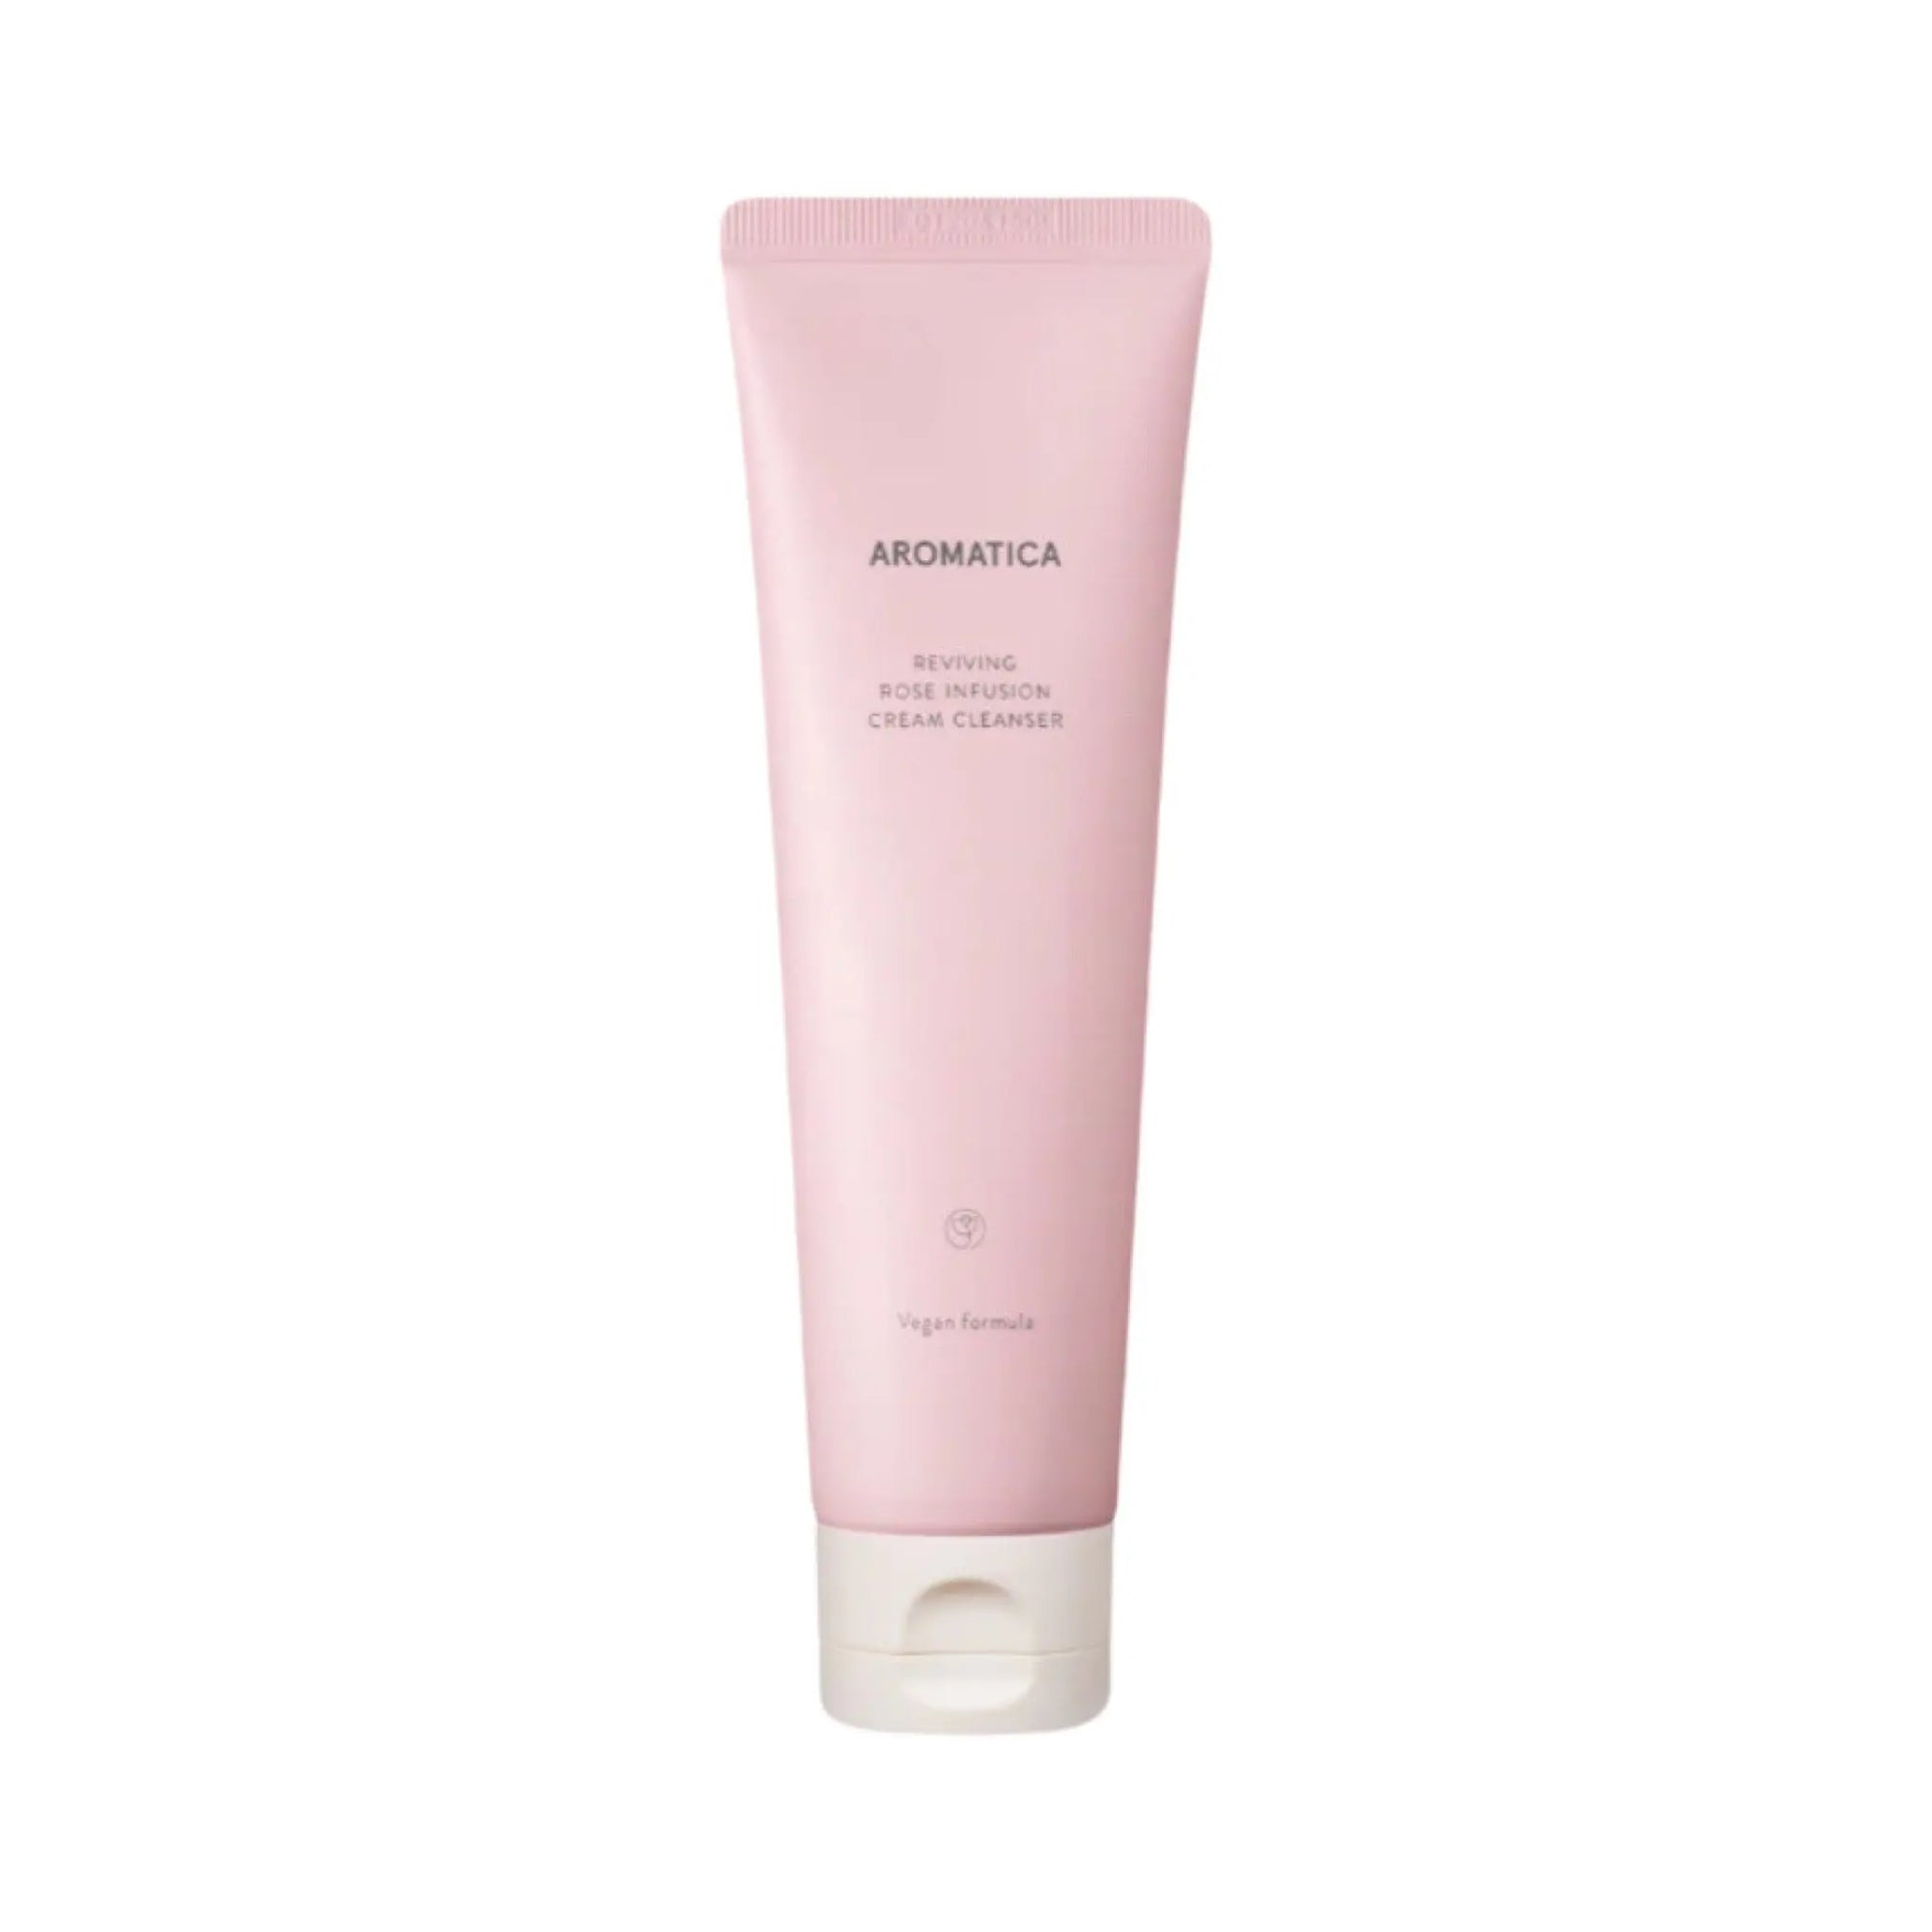 Aromatica - Reviving Rose Infusion Cream Cleanser 145g Aromatica